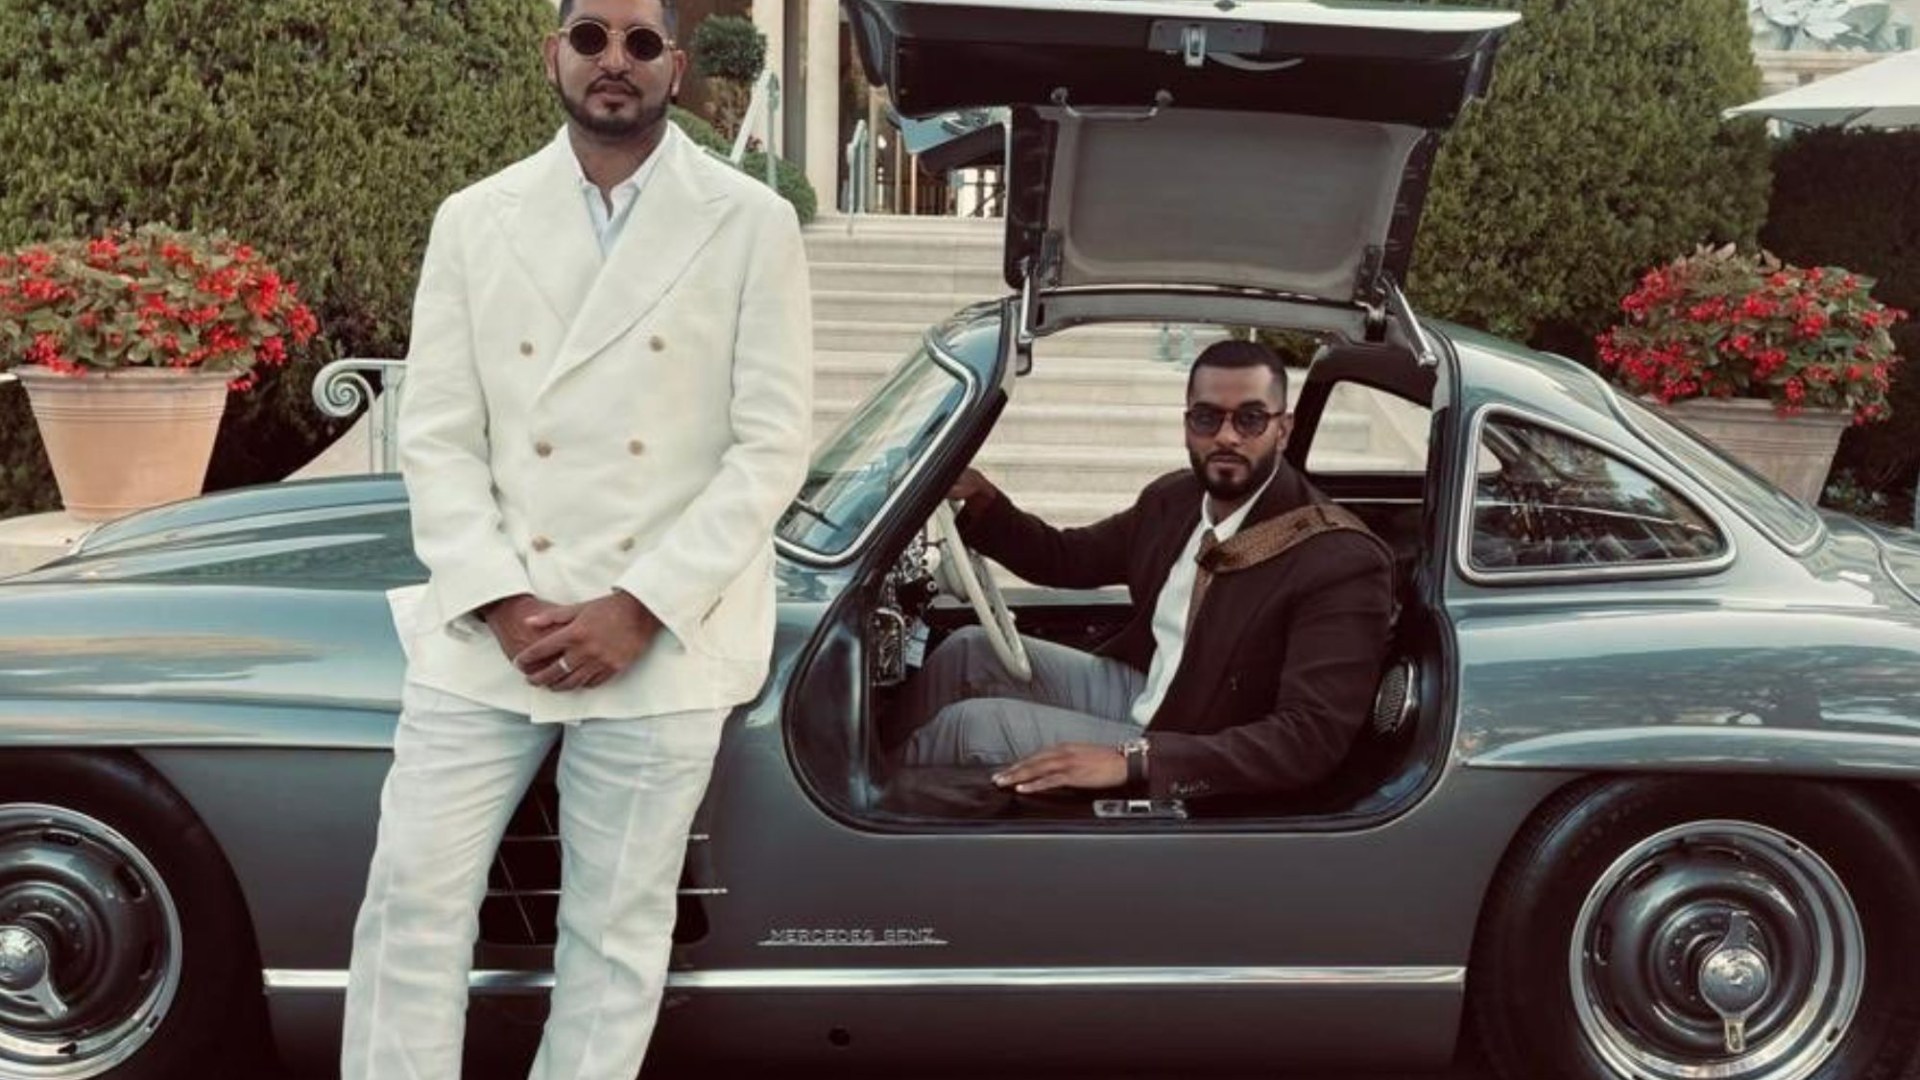 Former PrettyLittleThing boss Umar Kamani and his brother Adam launch brand new agency away from fashion [Video]